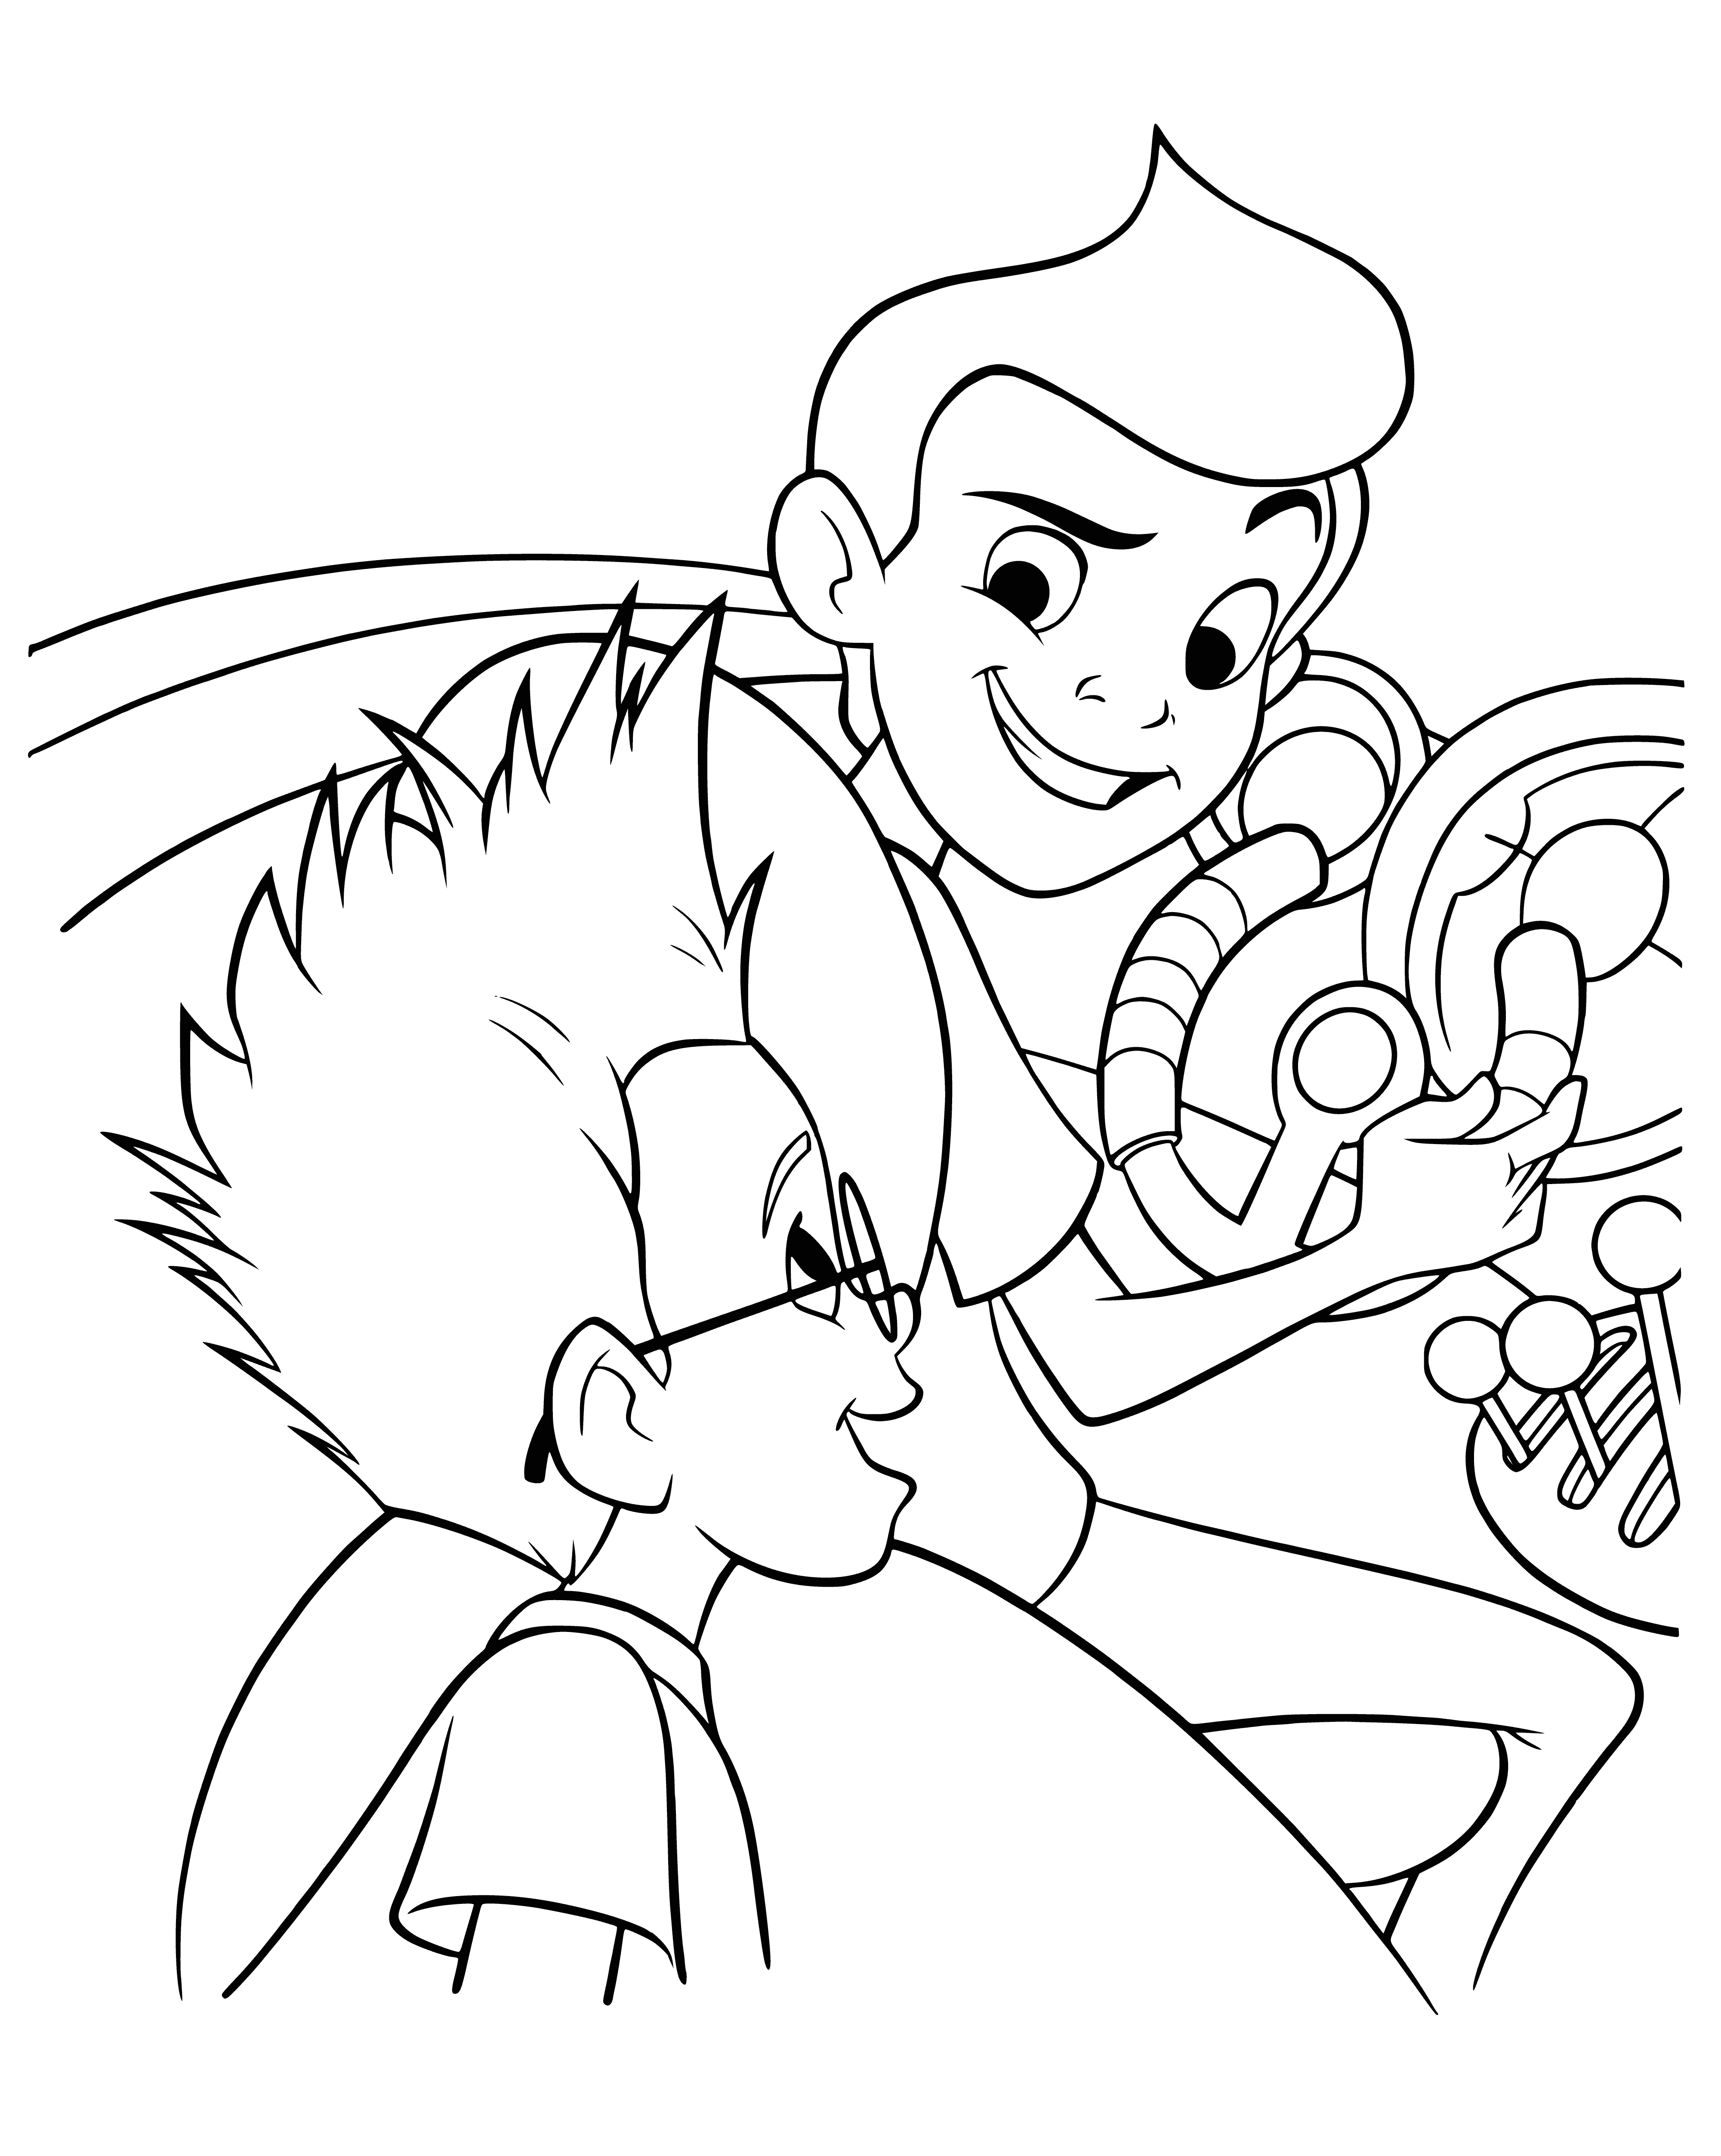 Lewis and Wilber coloring page